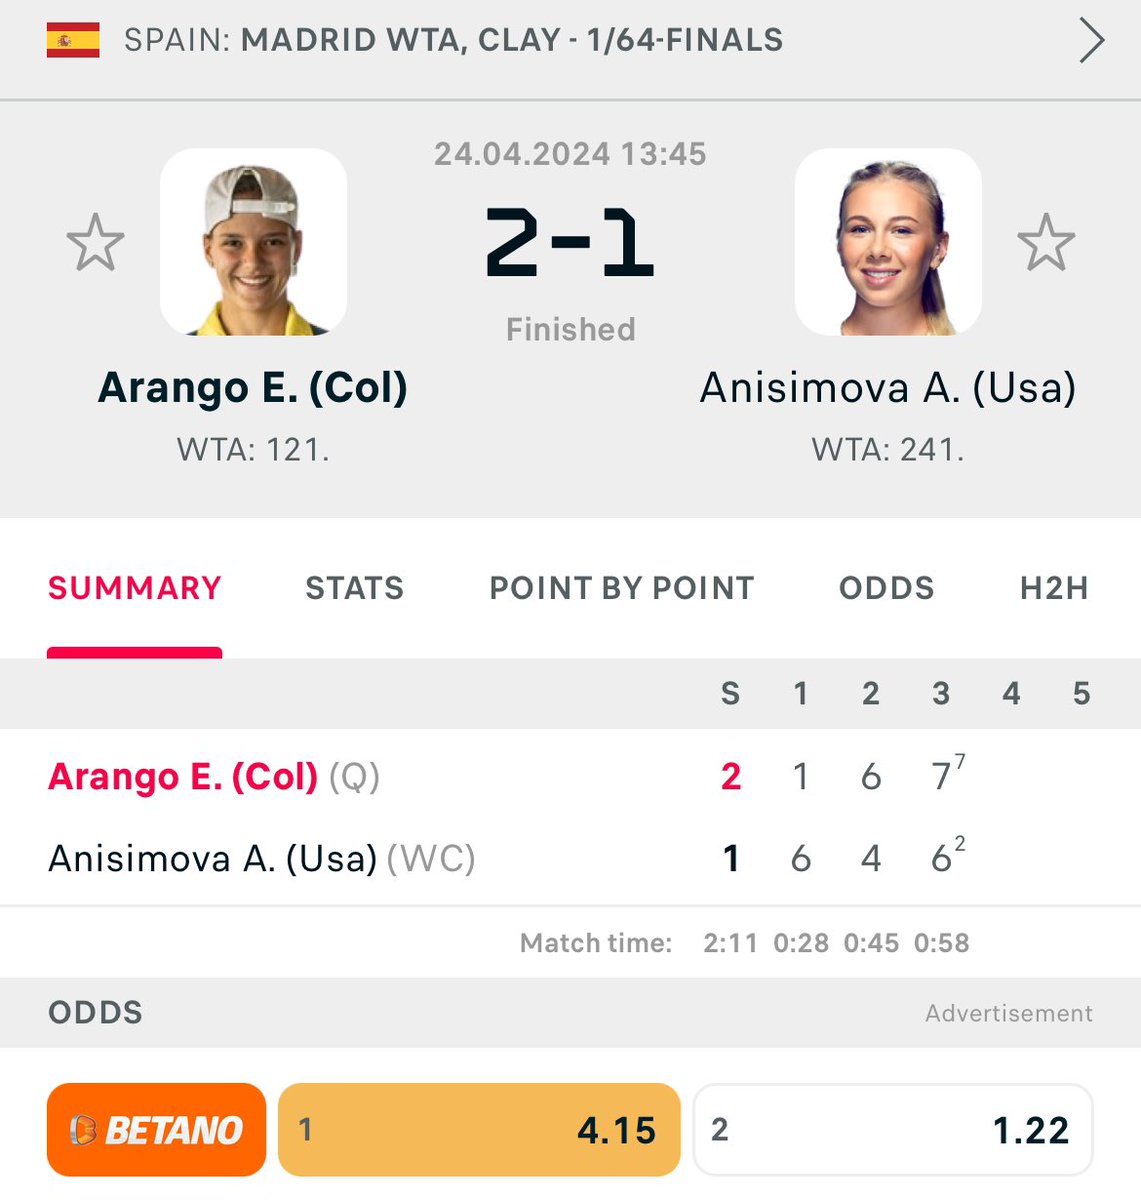 Anisimova was up a break four times and served for the match twice against Arango. Managed to lose the match. This tournament is so fcking scripted, disgusting pigs! 🐷